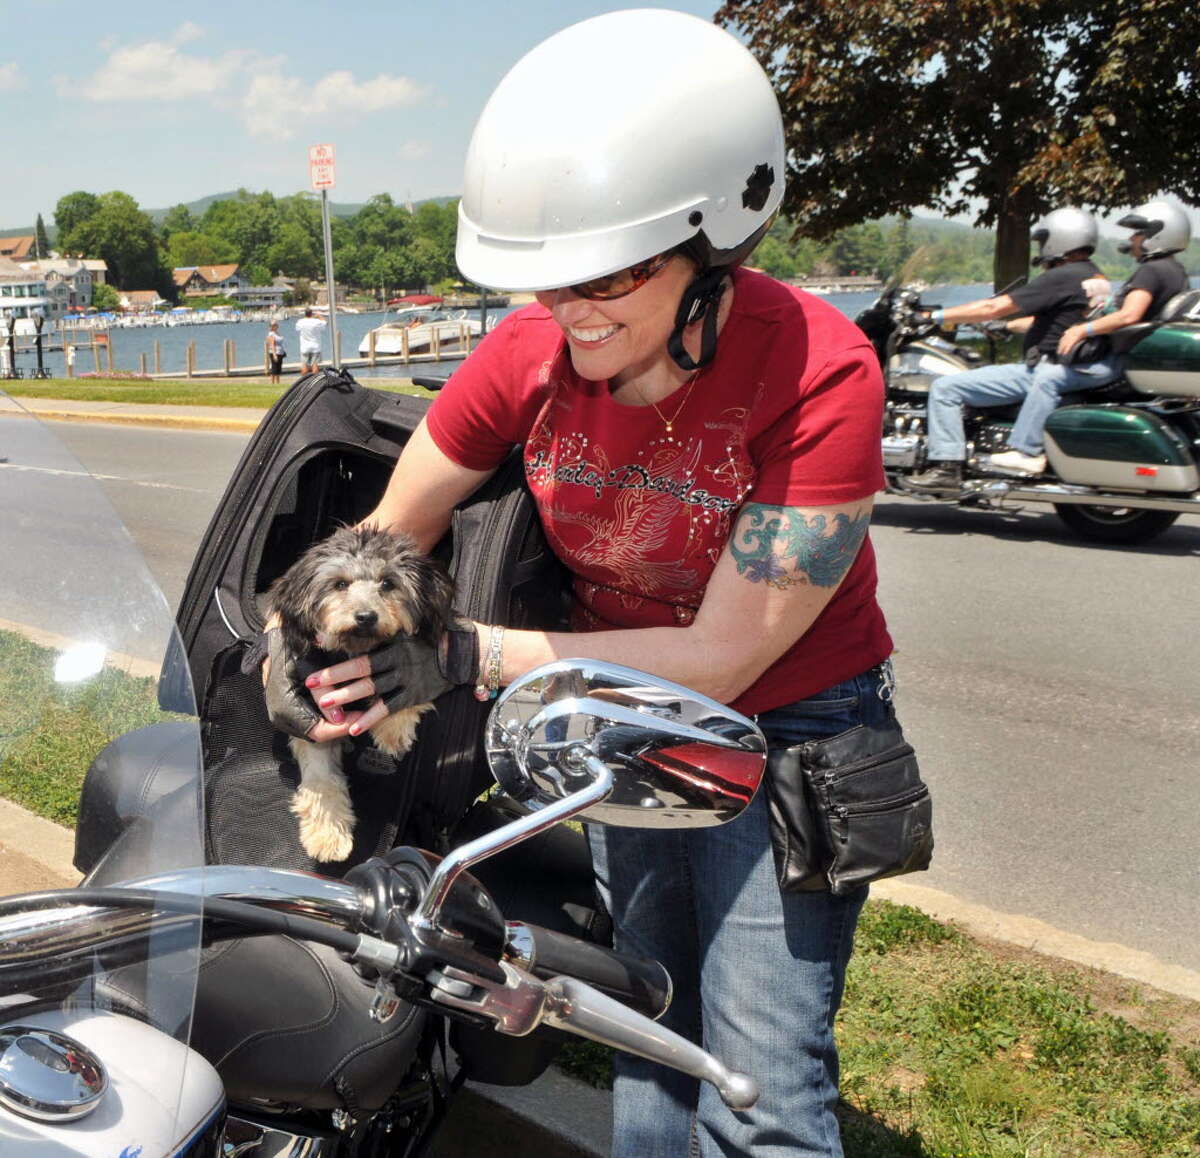 Motorcyclist Michelle Gonsalves of South Paris, Maine fill tucks her 6-month-old puppy 